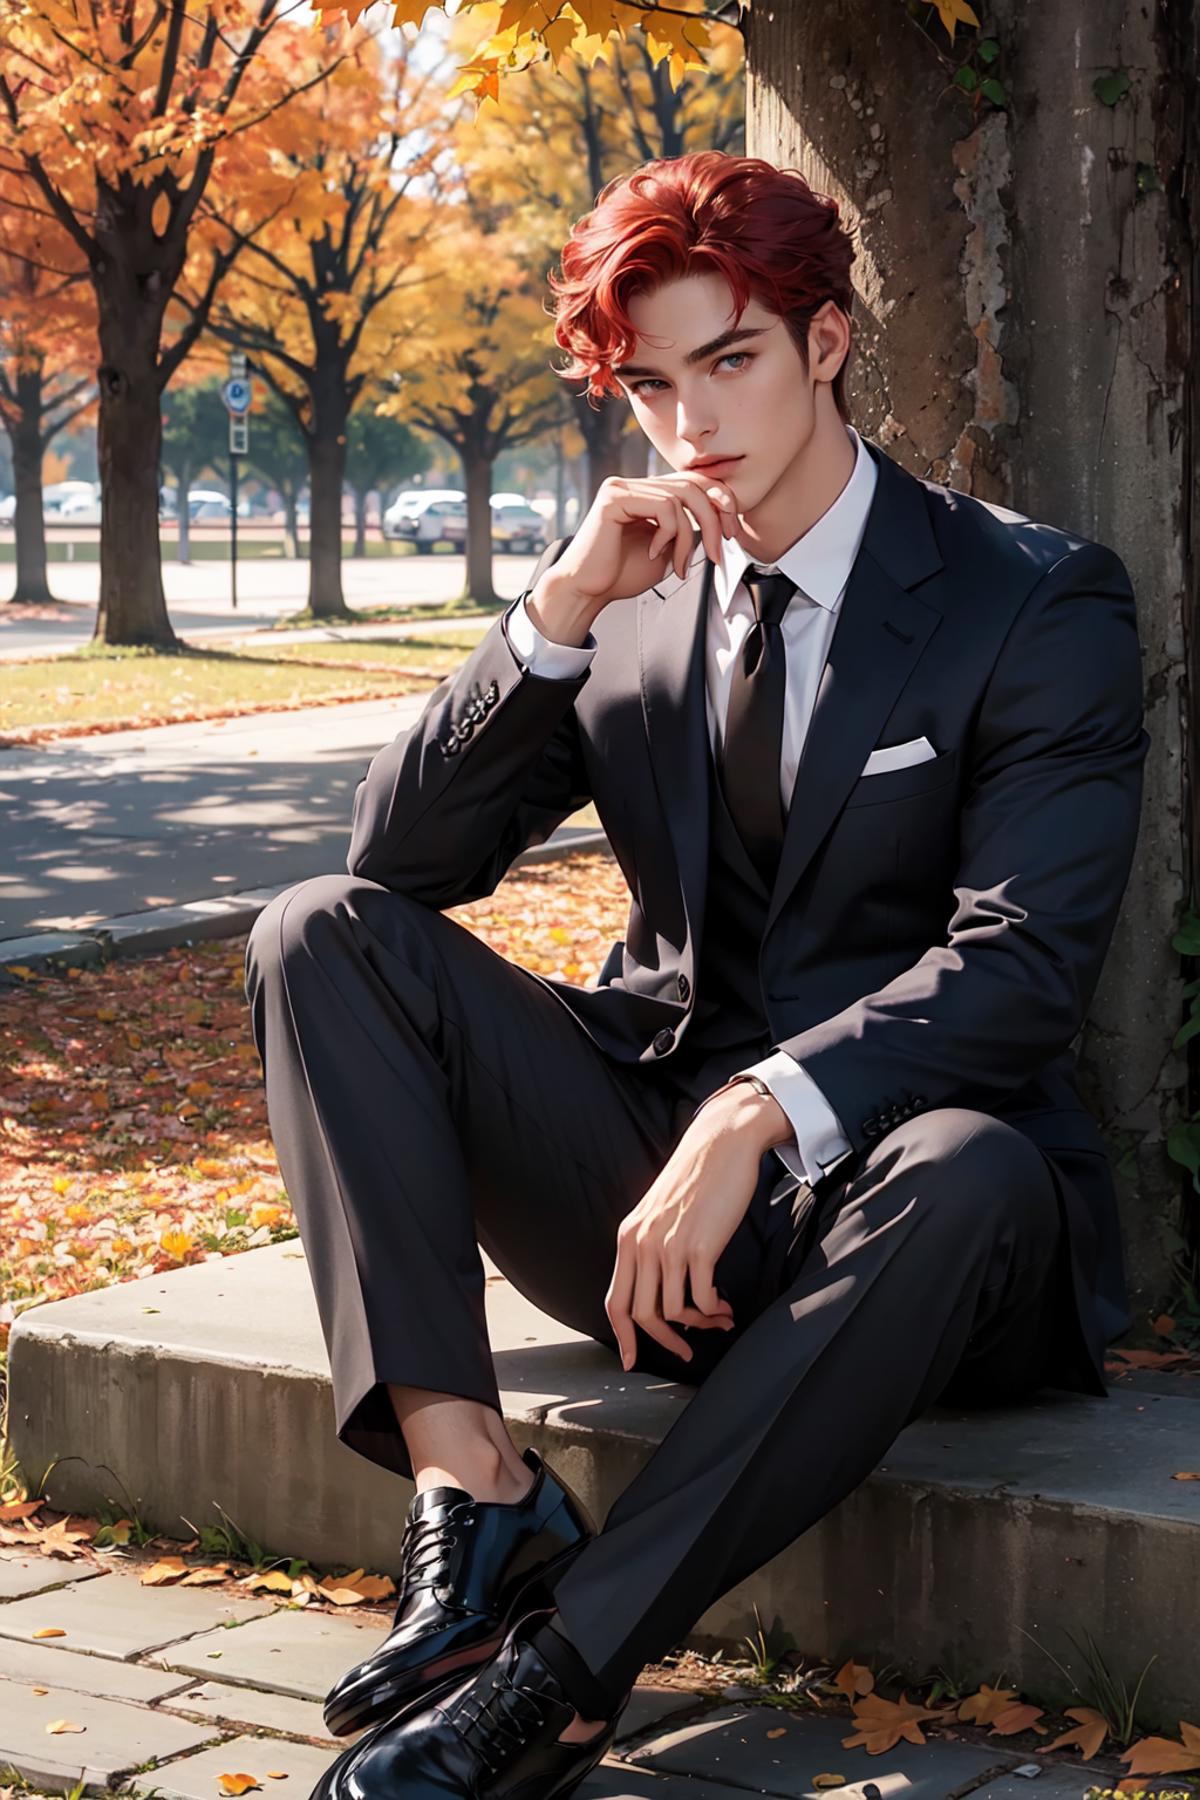 A man in a suit and tie sitting on a step outside.